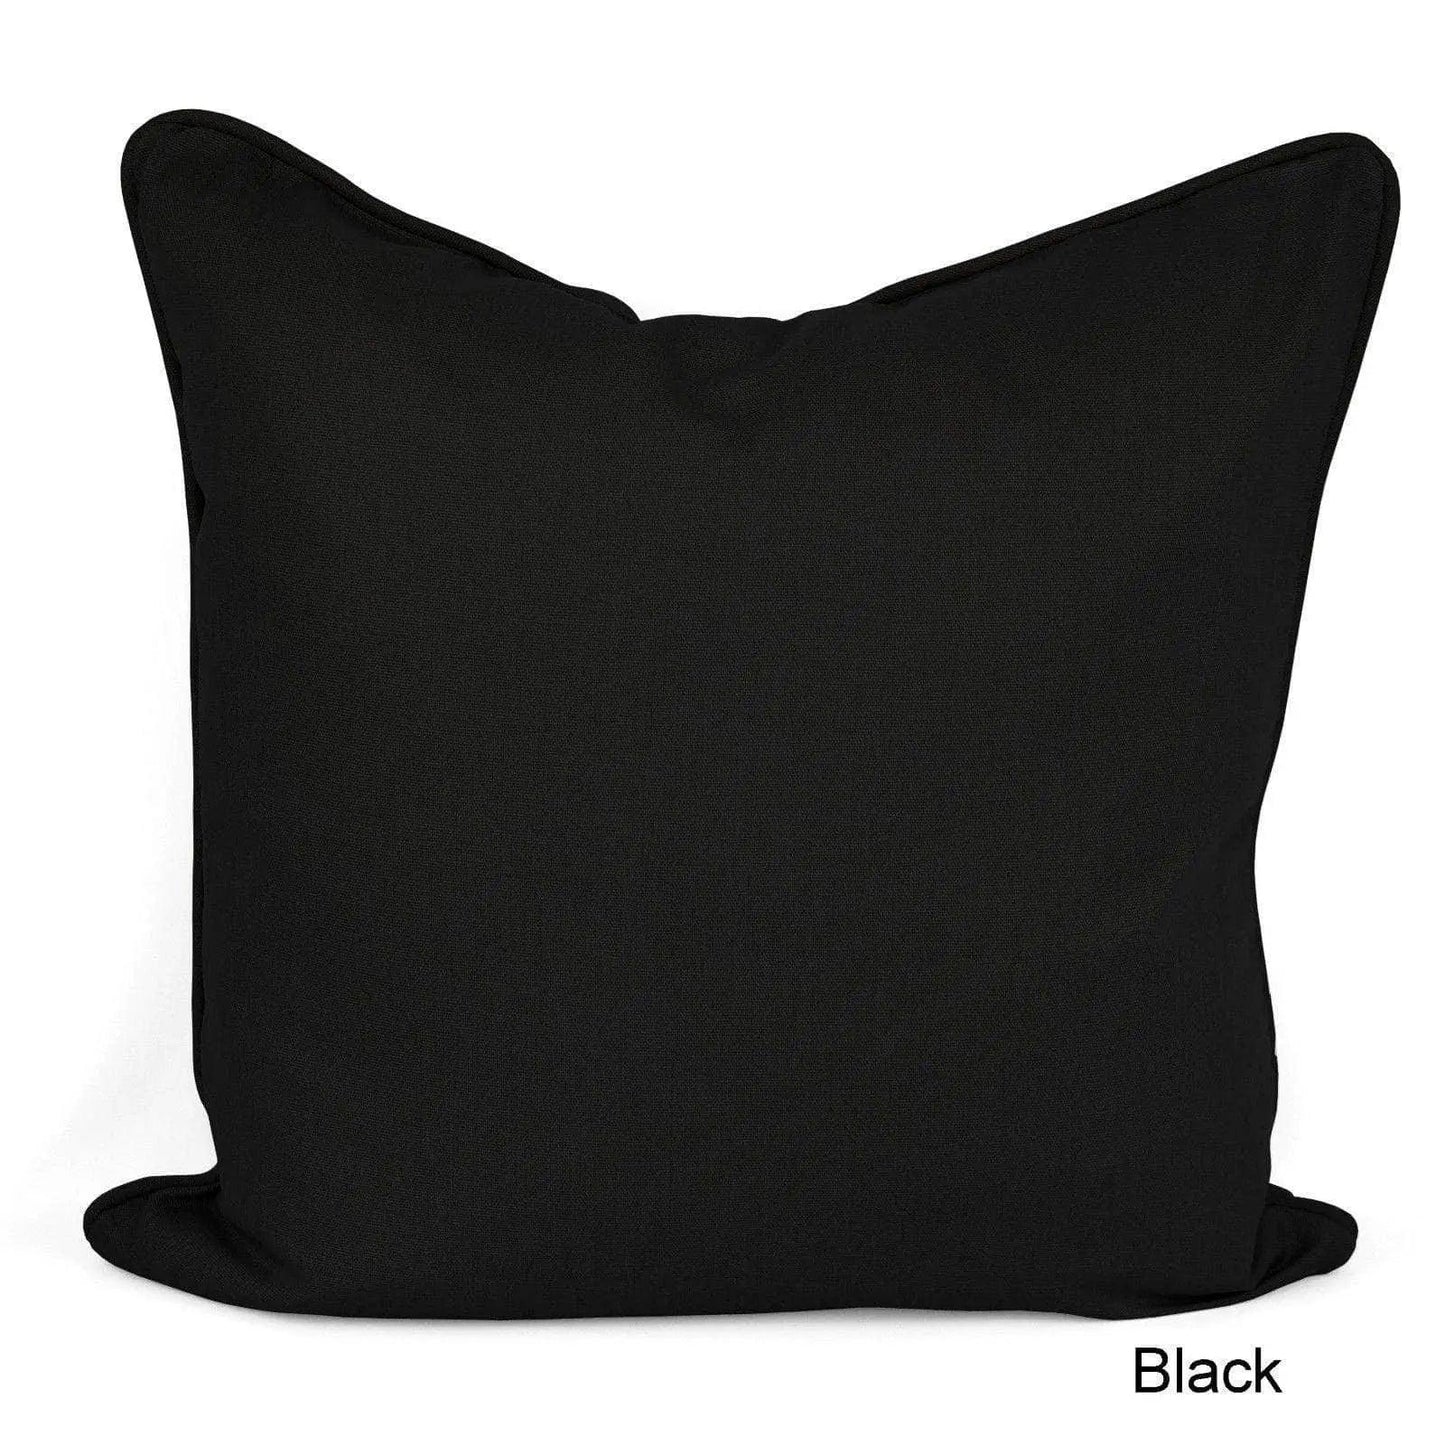 a black pillow on a white background